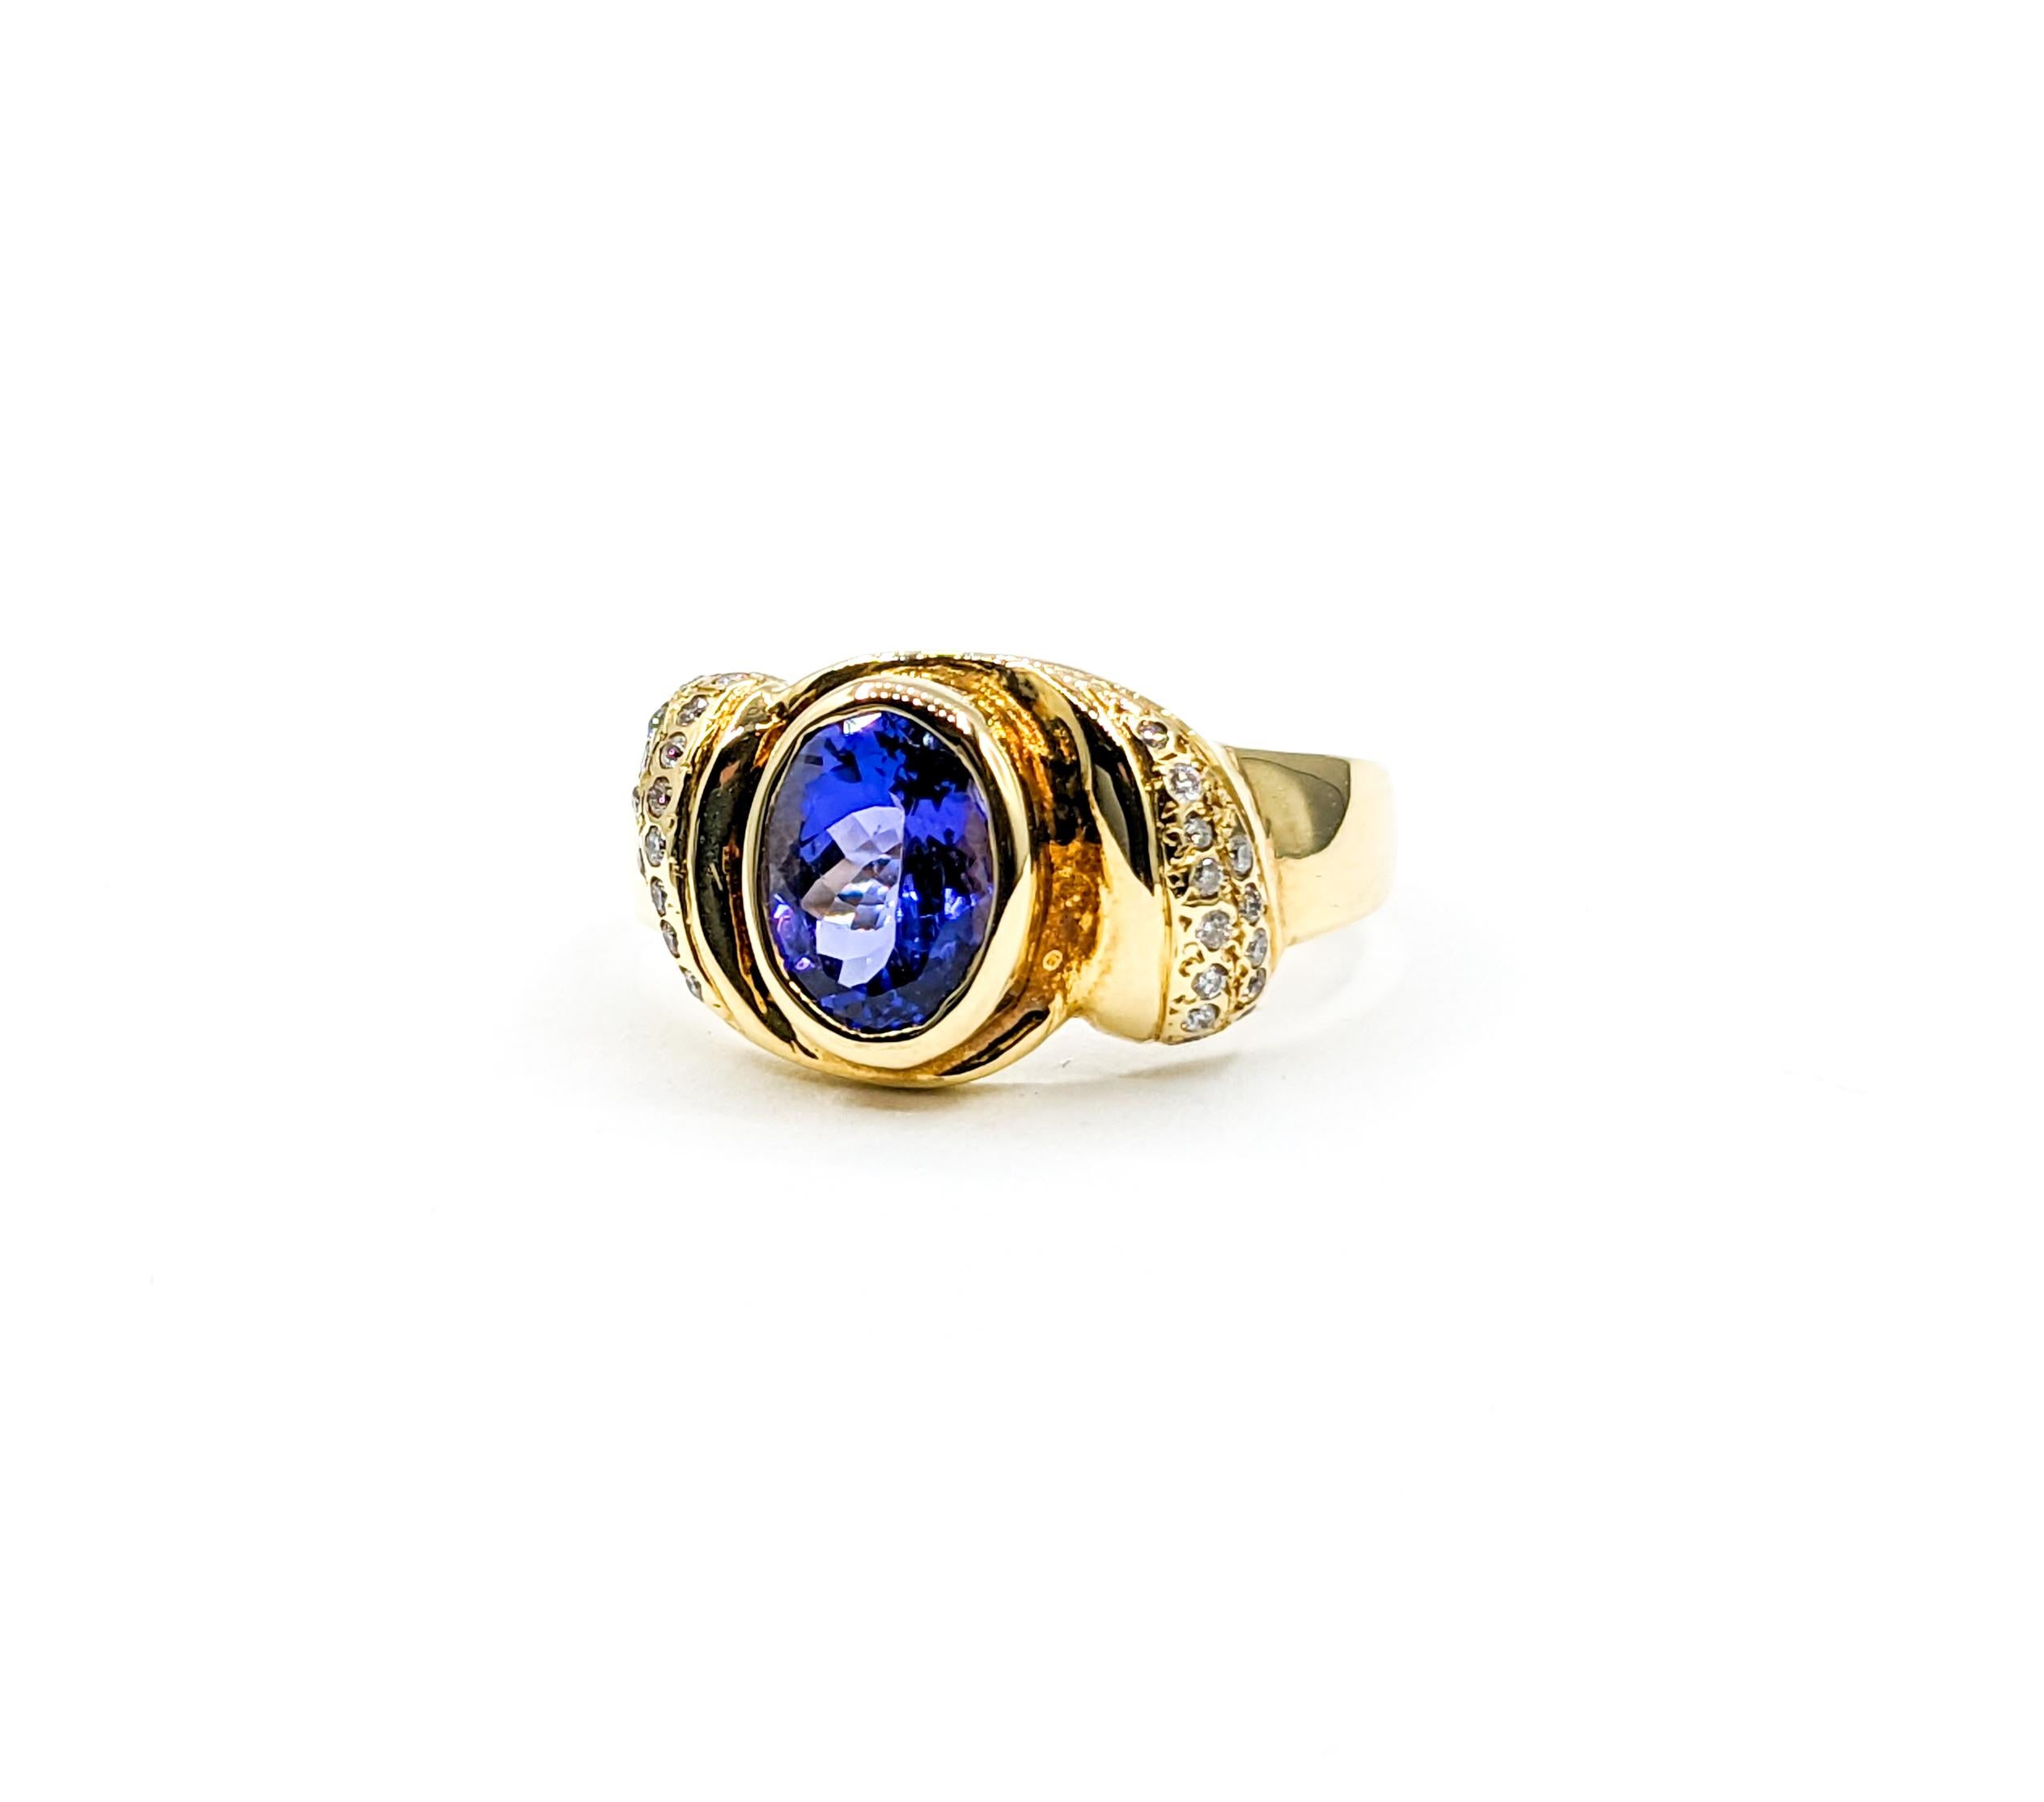 Charming Oval Tanzanite & Diamond Cocktail Ring

Introducing this captivating tanzanite ring, meticulously crafted in 14k yellow gold. This stunning ring celebrates a 8x6mm oval Tanzanite center stone. It also features .10ctw round diamond details,